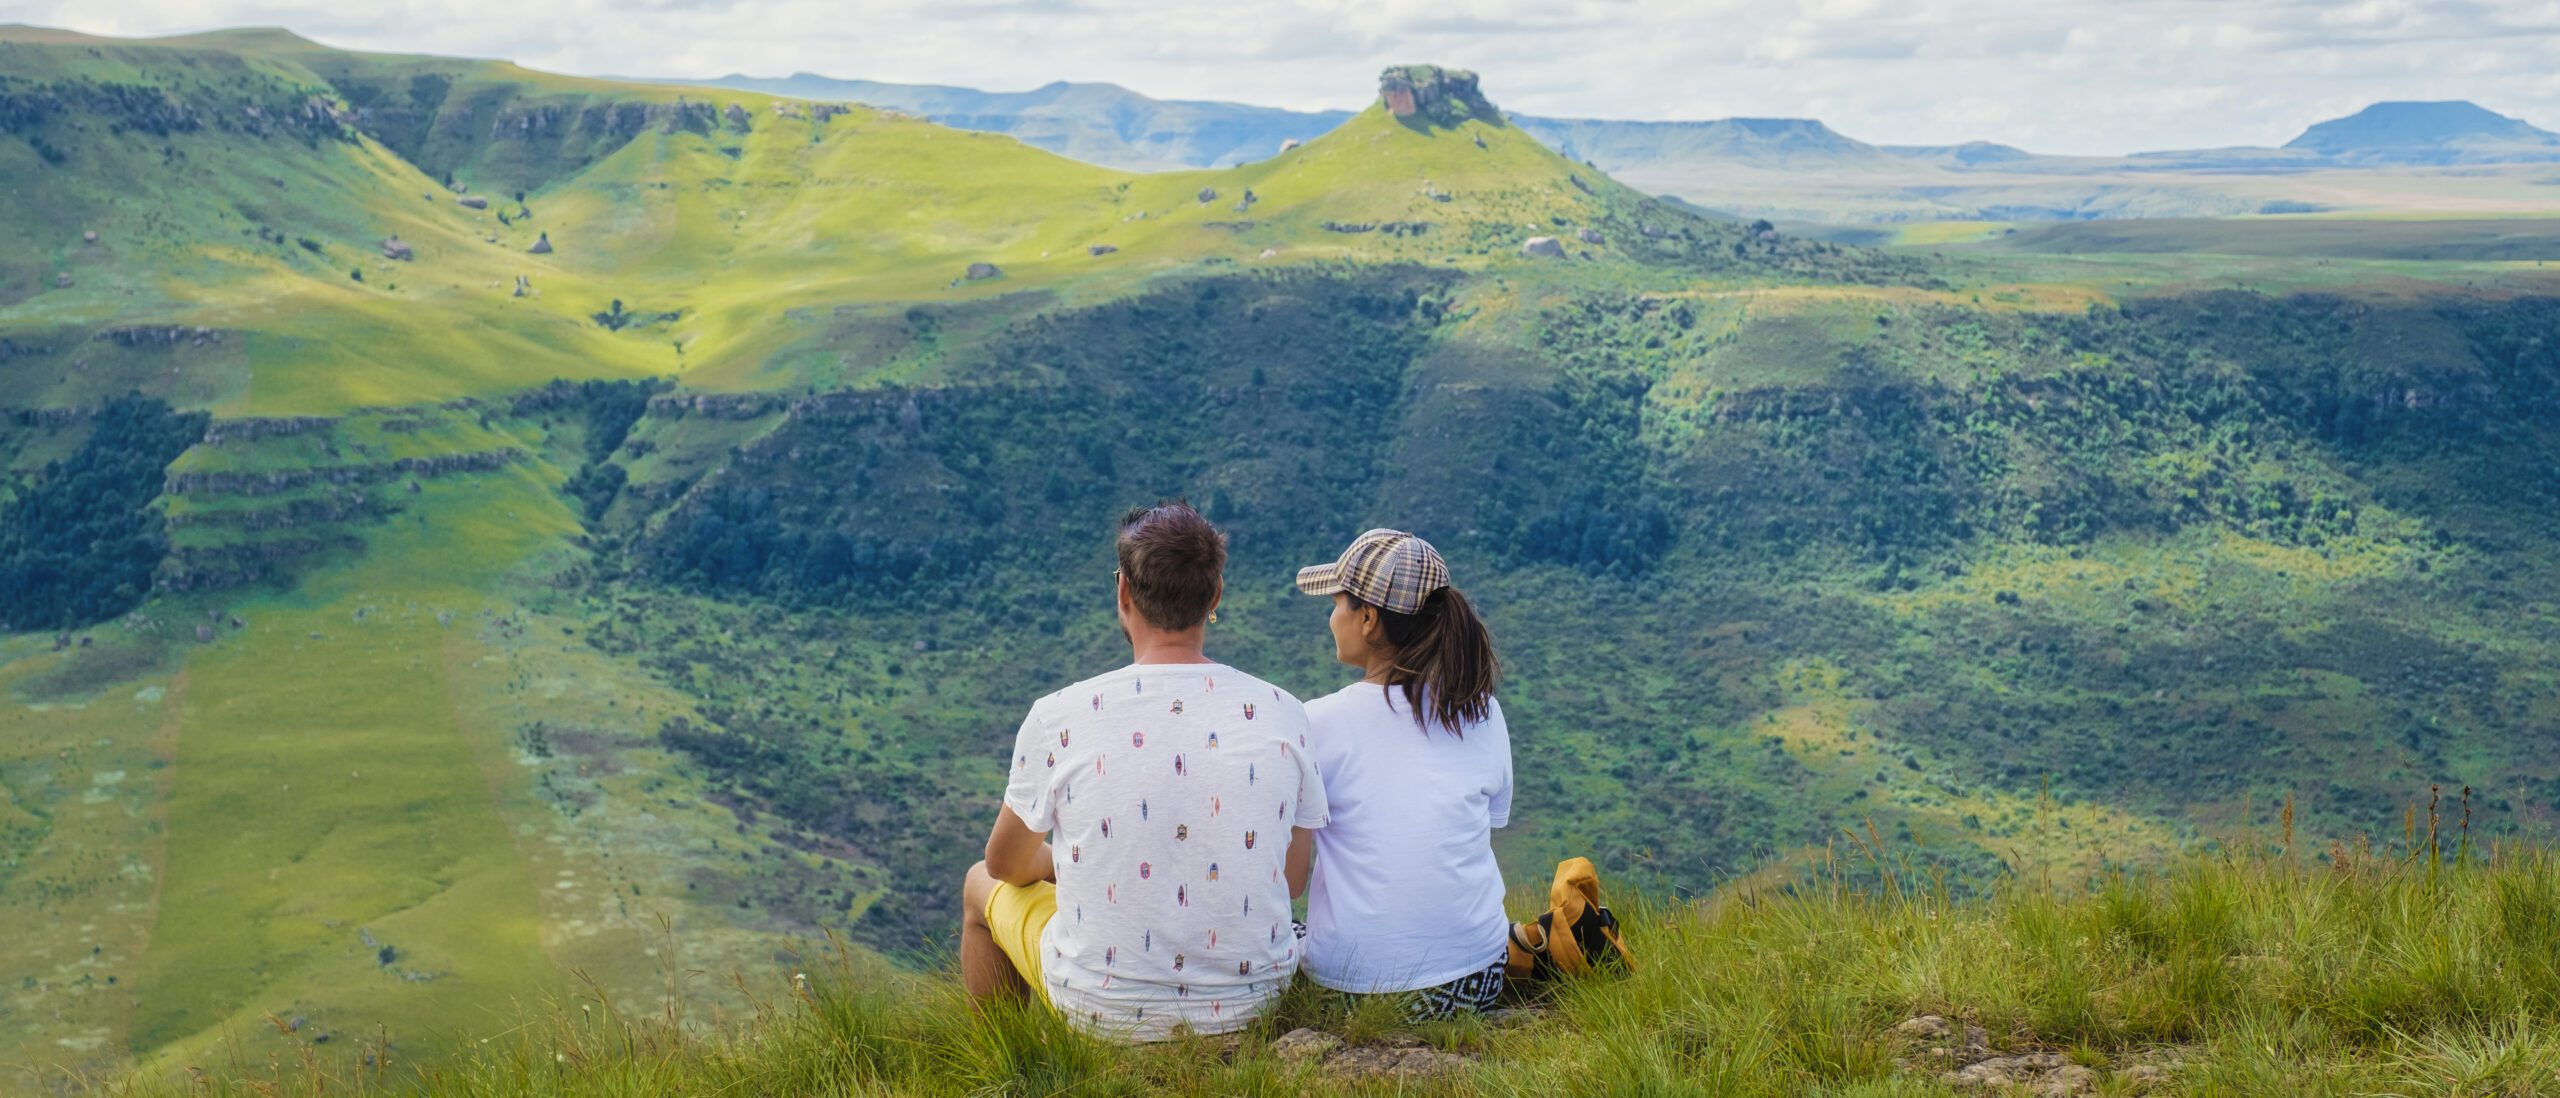 Young couple men andwoman hiking in the mountains of Drakensberg South Africa